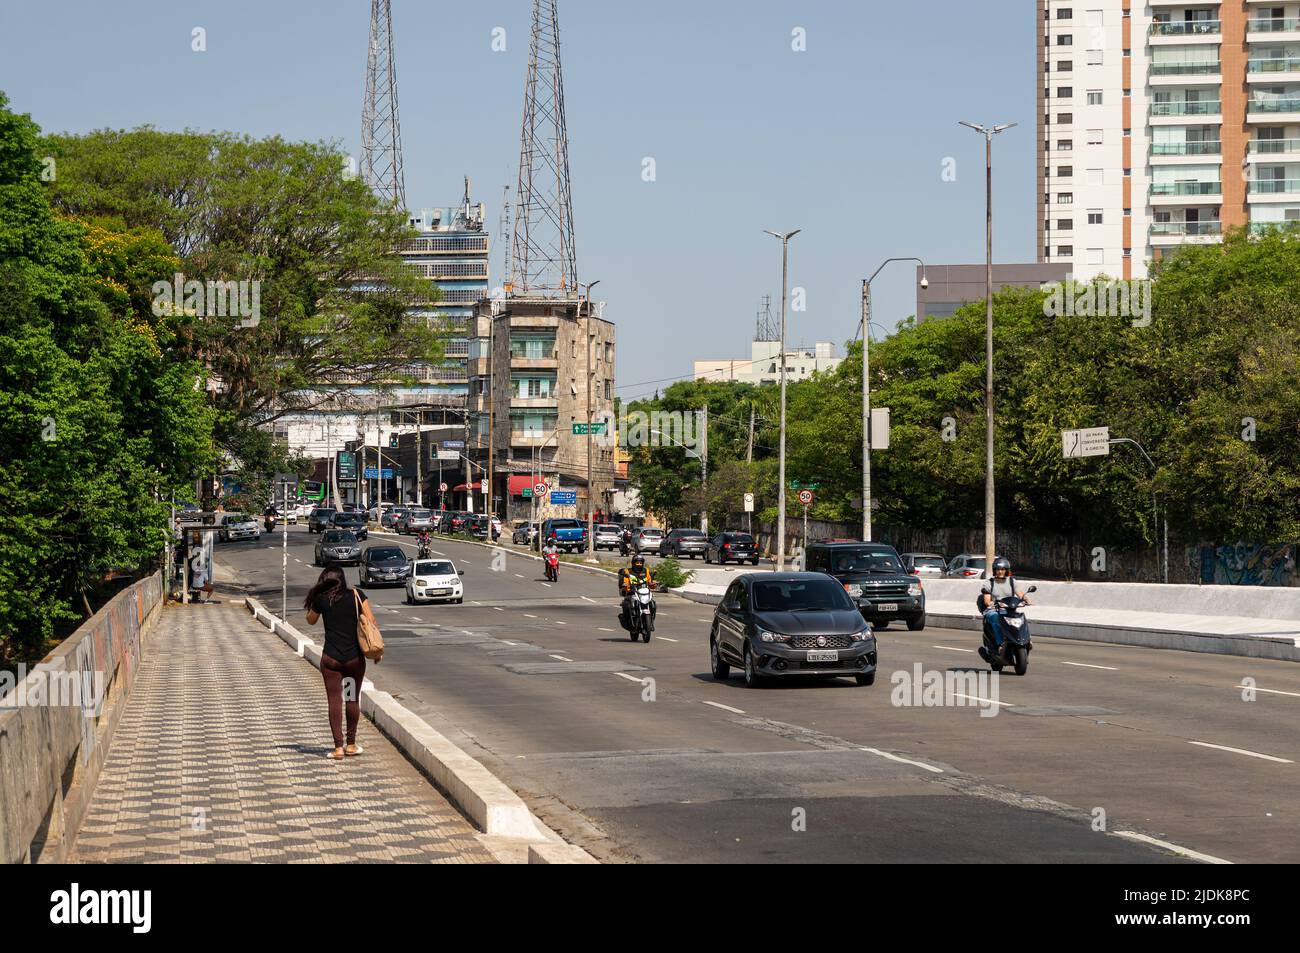 Oncoming traffic passing by Doutor Arnaldo avenue, over Capitao Adalberto Mendes viaduct in a normal business day under sunny clear blue sky. Stock Photo